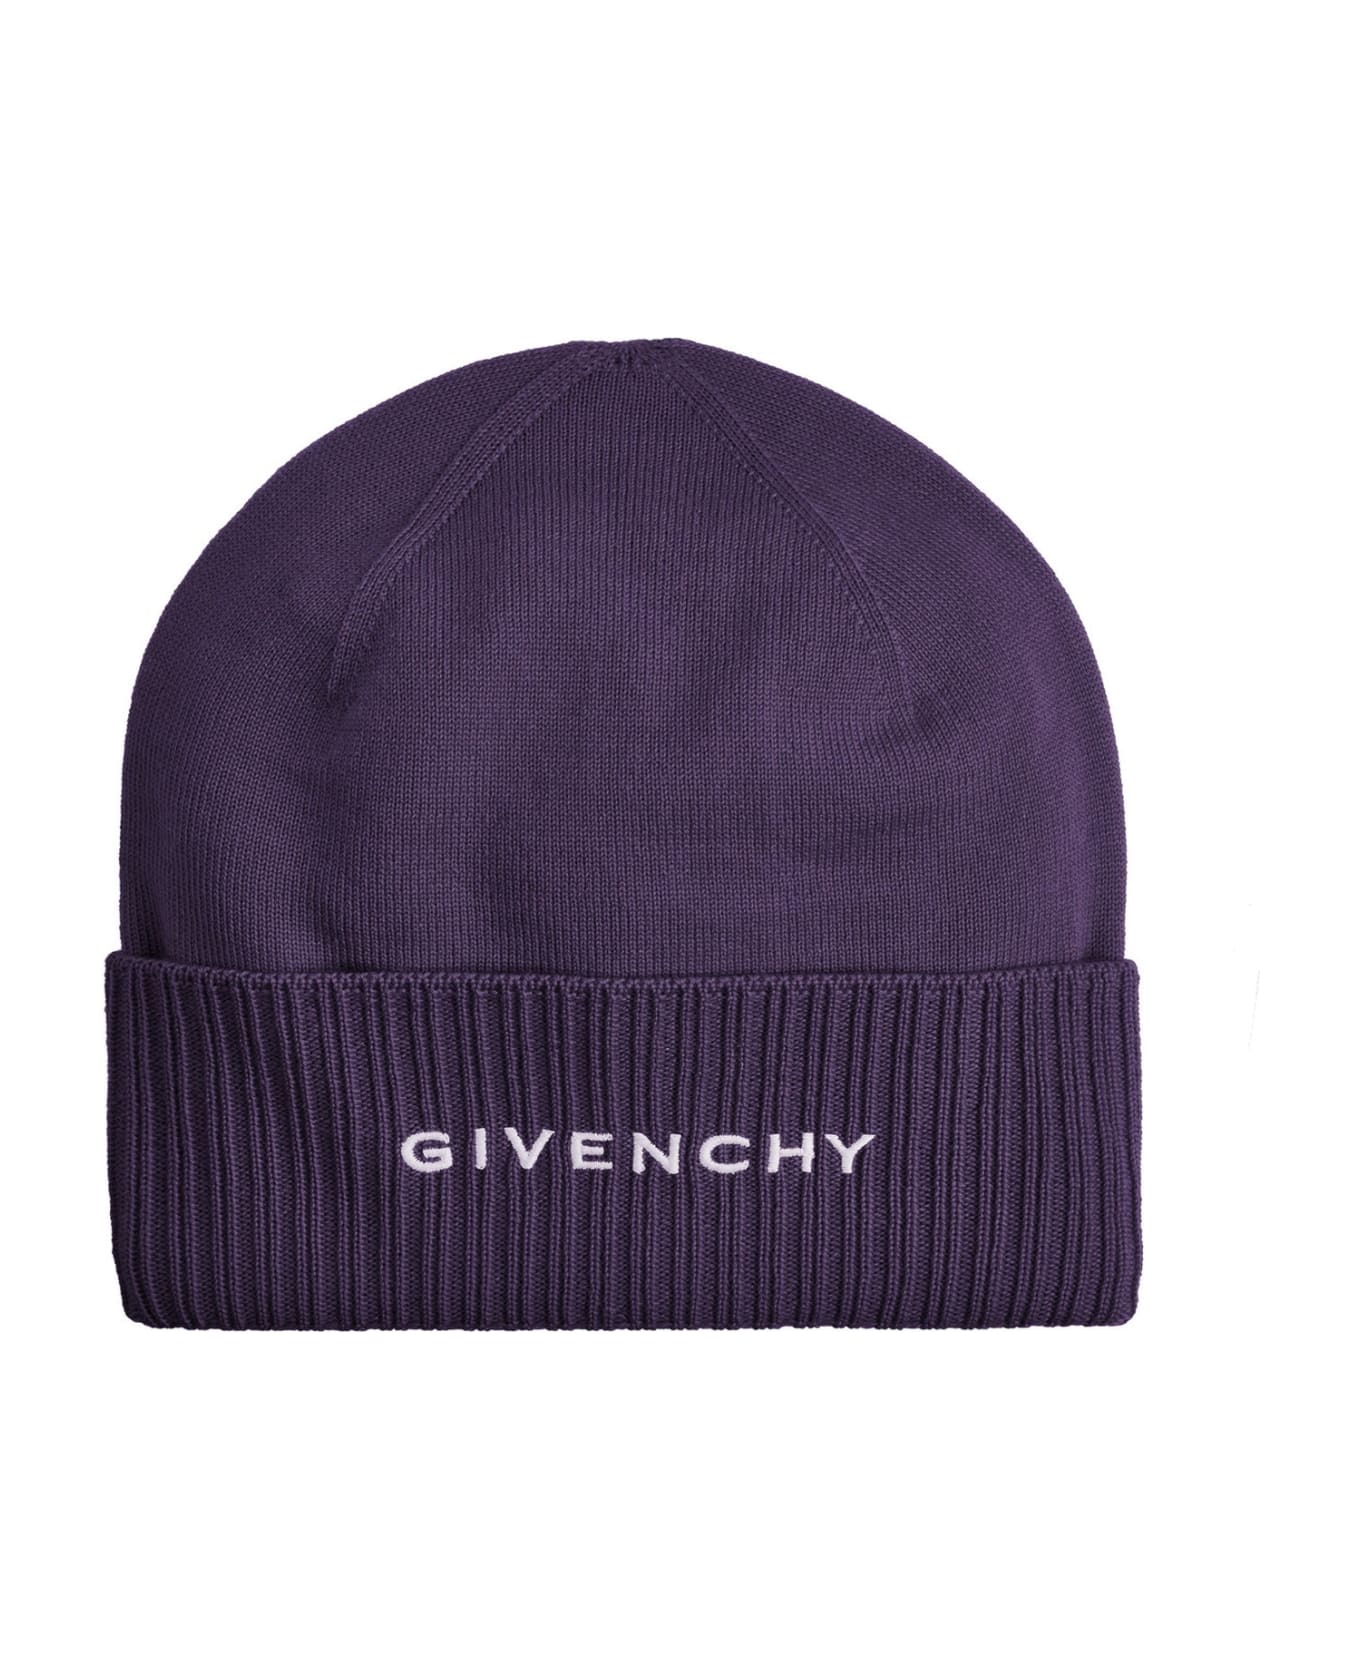 Givenchy Wool Print Hat - Purple